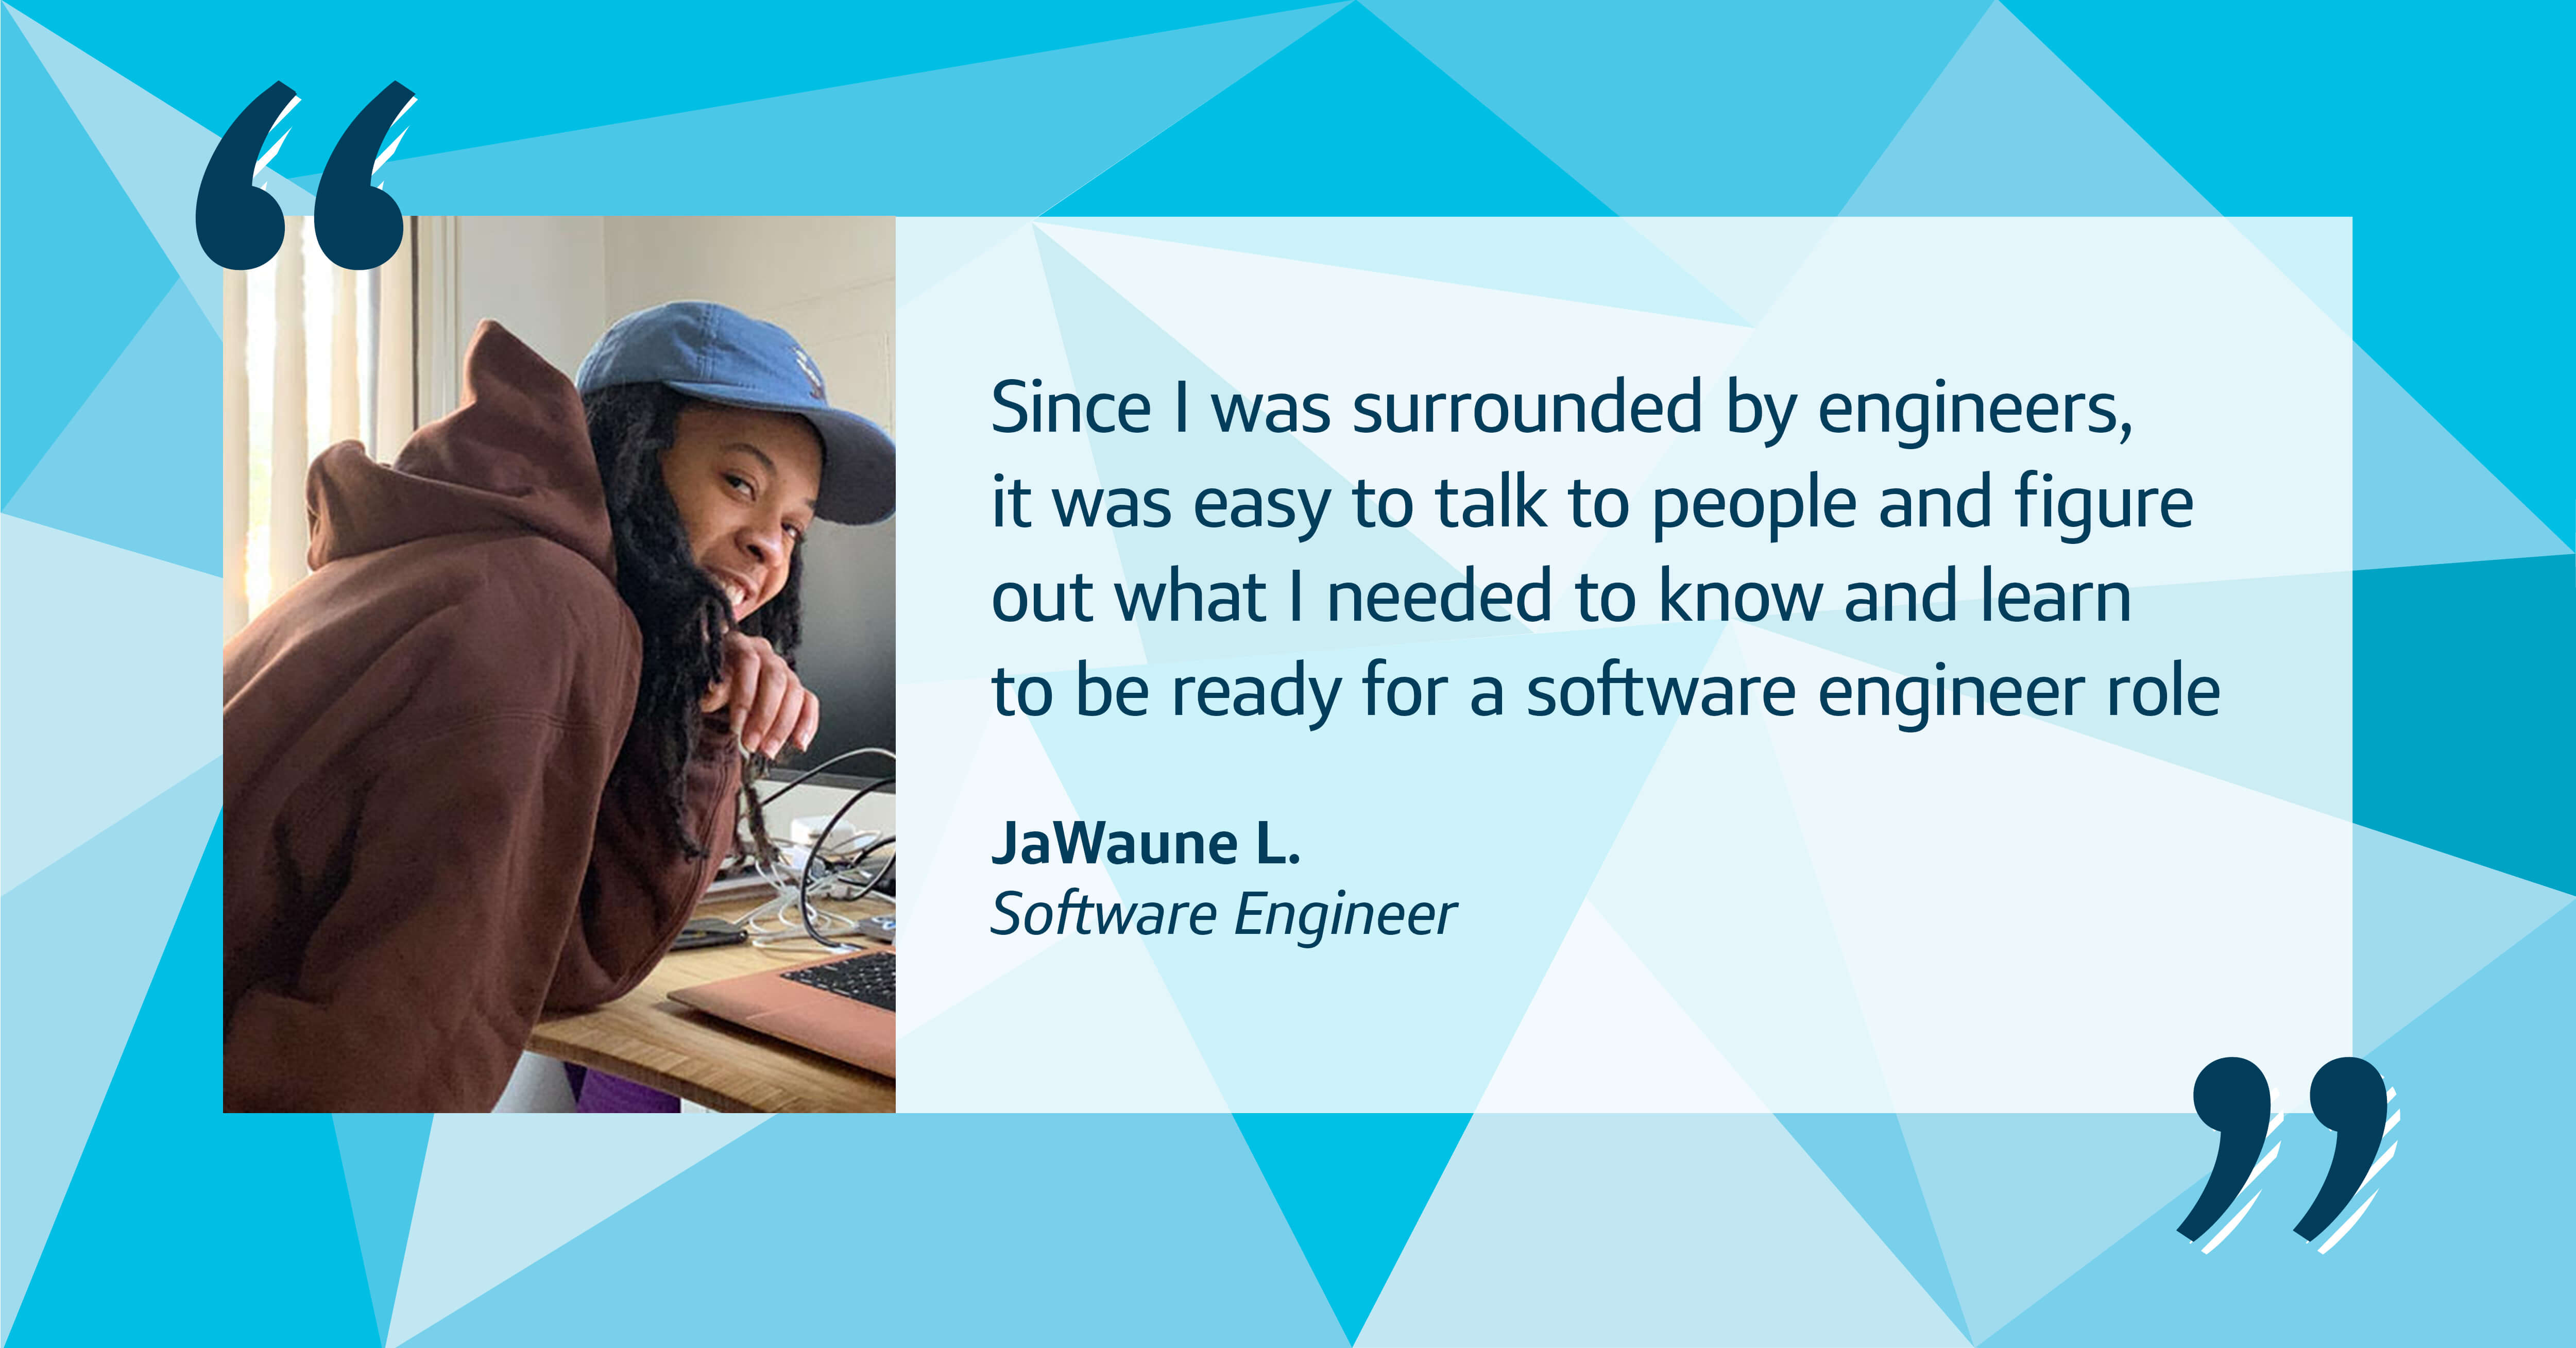 Capital One image quote with a picture of associate JaWaune, Software Engineer, that says, “Since I was surrounded by engineers, it was easy to talk to people and figure out what I needed to know and learn to be ready for a software engineer role,” Jae recalls.